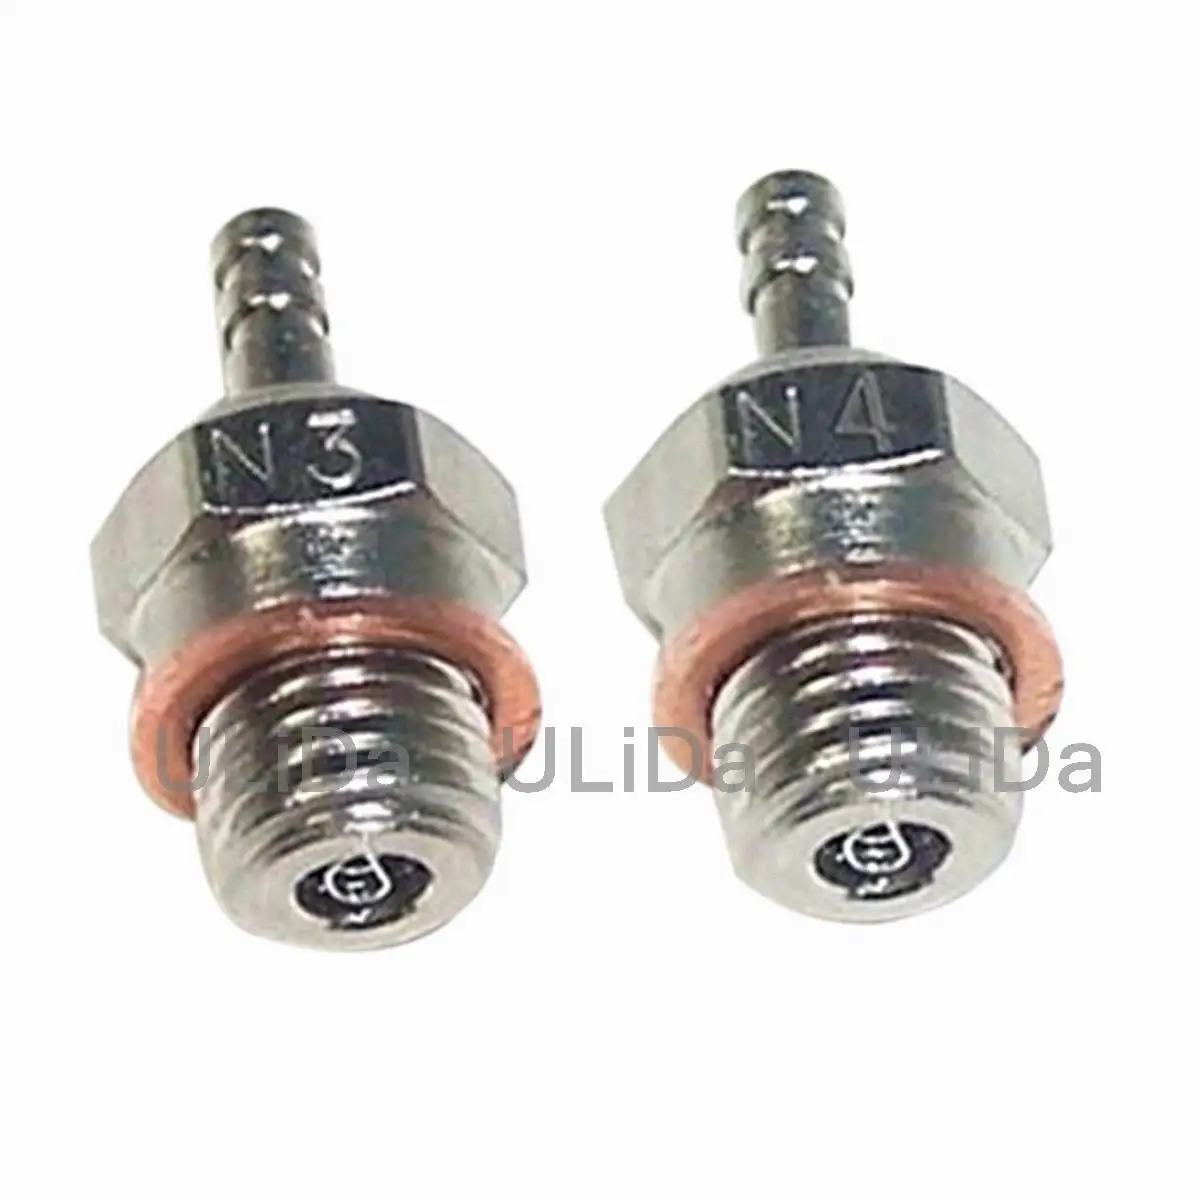 

2x HSP 70117 N3 #3 #4 N4 Hot Glow Plug Spark For Vertex SH Nitro Engine Parts 1/10 1/8 RC Buggy Monster Truck Replace Parts